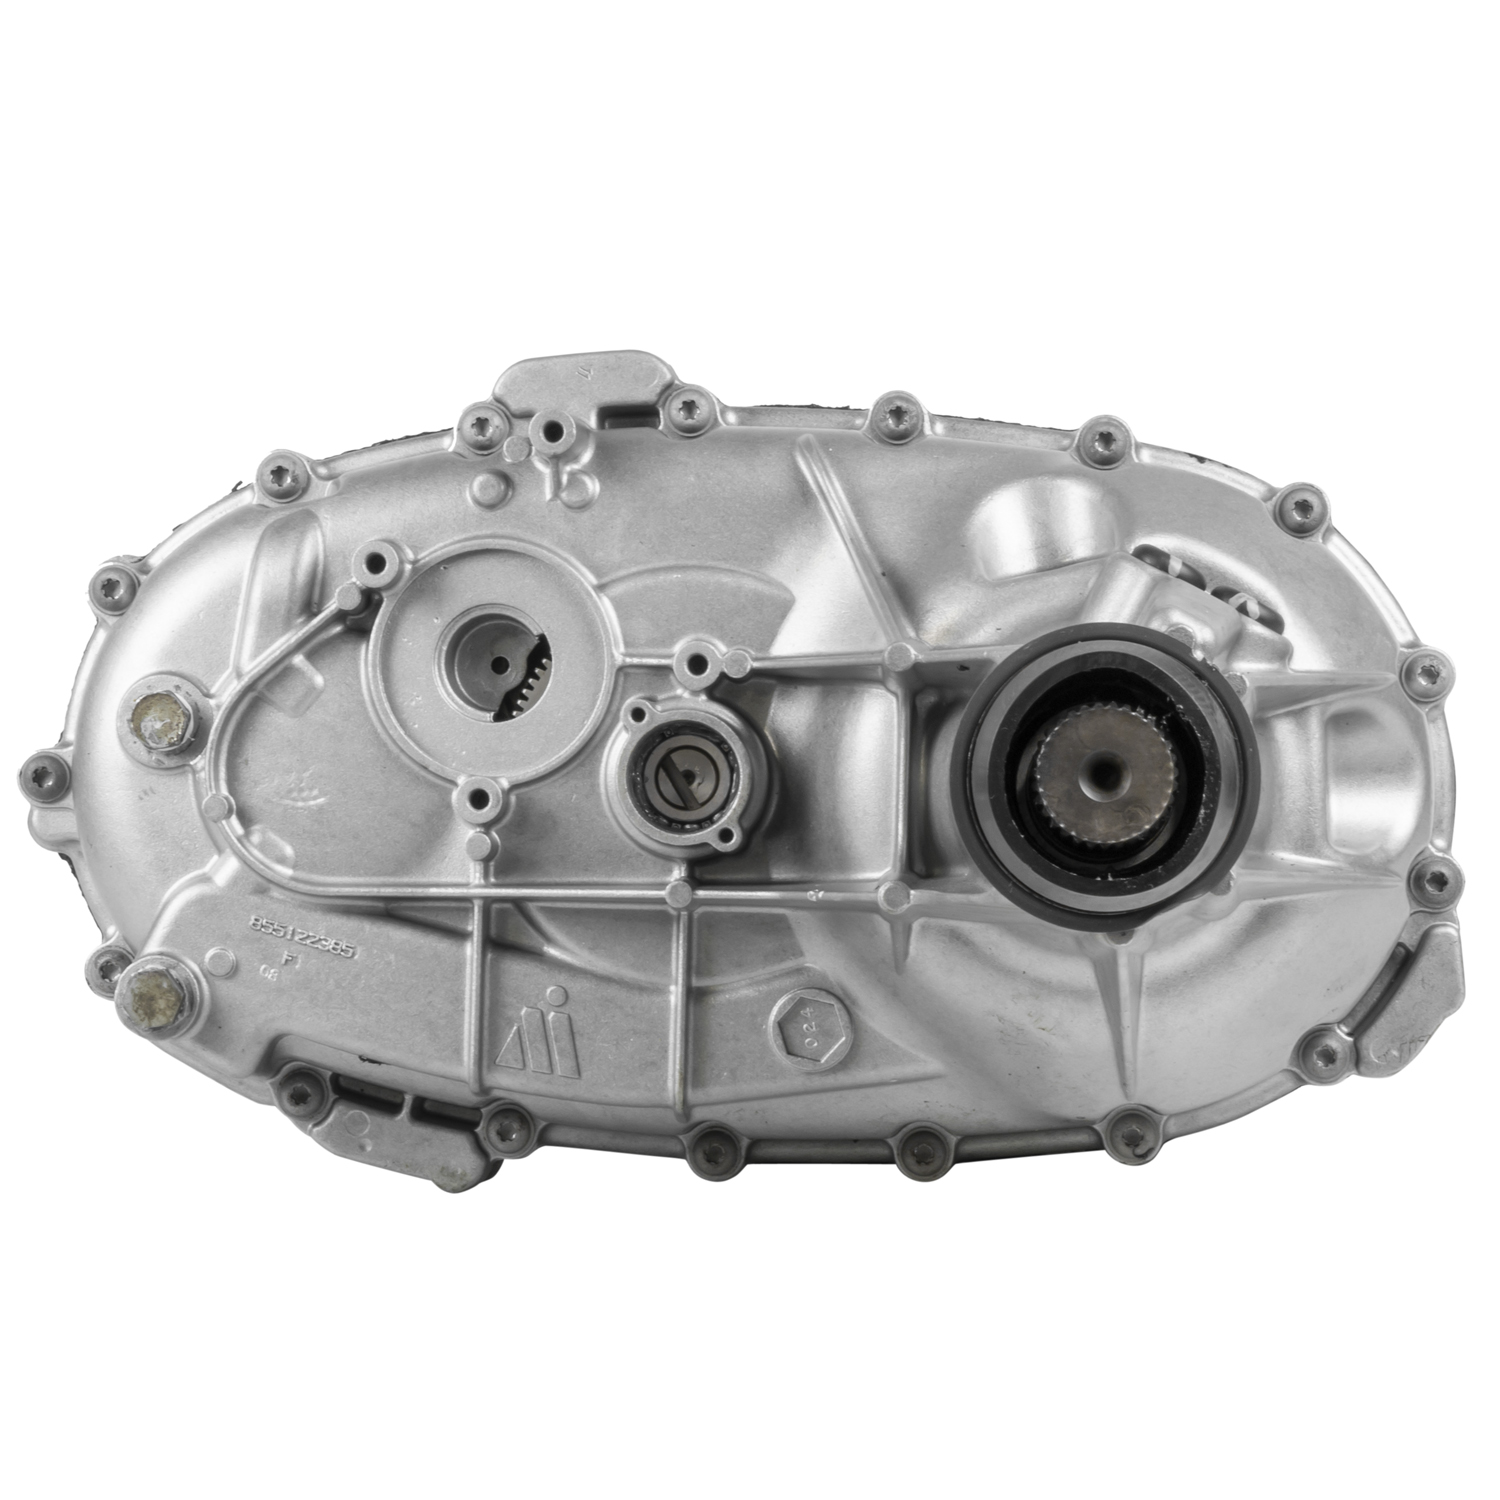 Remanufactured MP3024 Electric Shift Transfer Case, 2008-2014 Sierra/Silverado 2500, 2008-2013 Suburban/Yukon XL 2500, And 2016 Suburban 3500, With Option Code NQH. Includes a New Shift Motor.